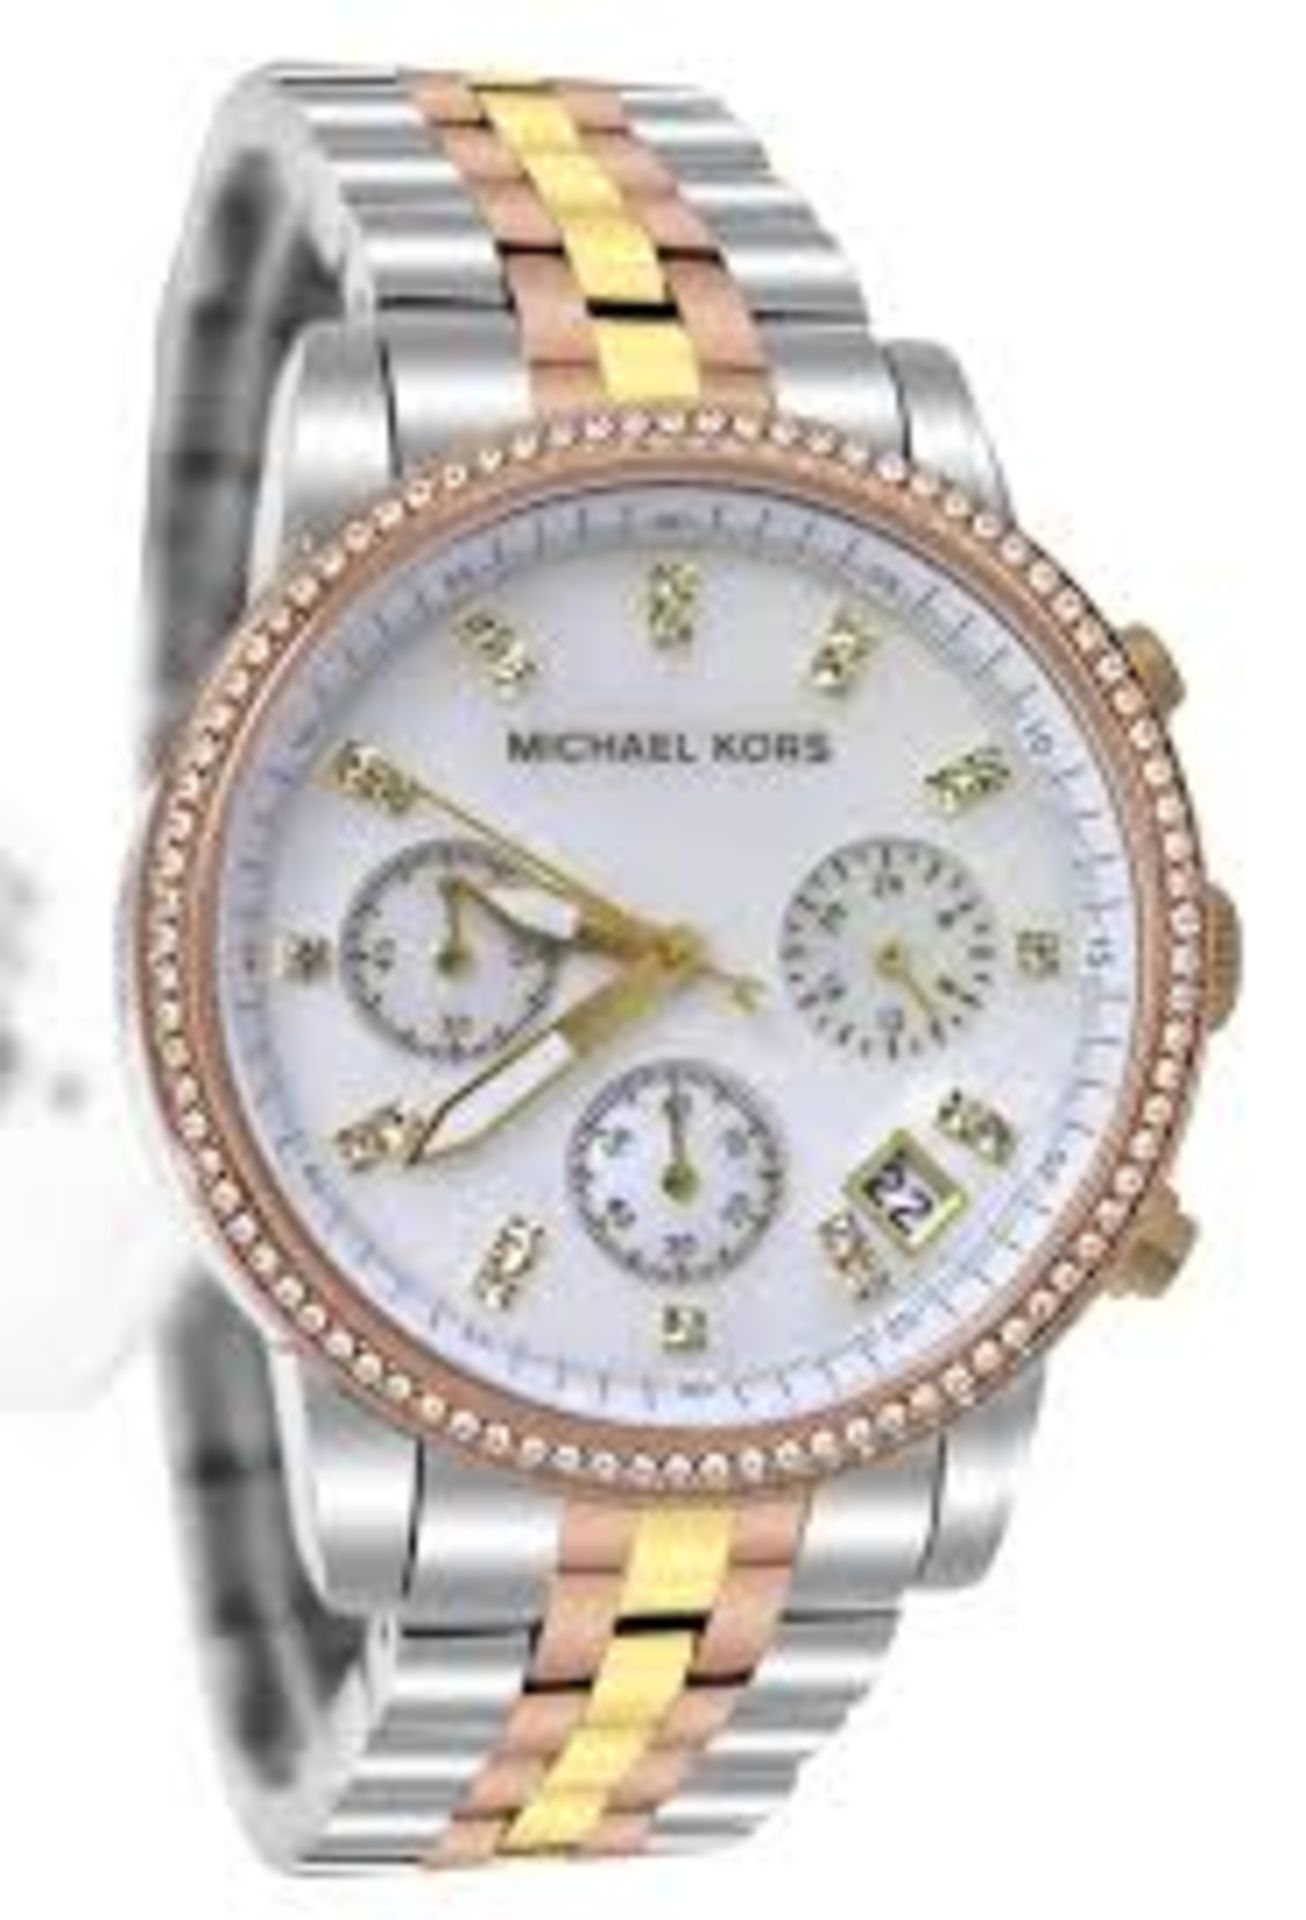 Ritz collection from Michael Kors, model number MK5650, stainless steel with tri- colour strap. - Image 2 of 2